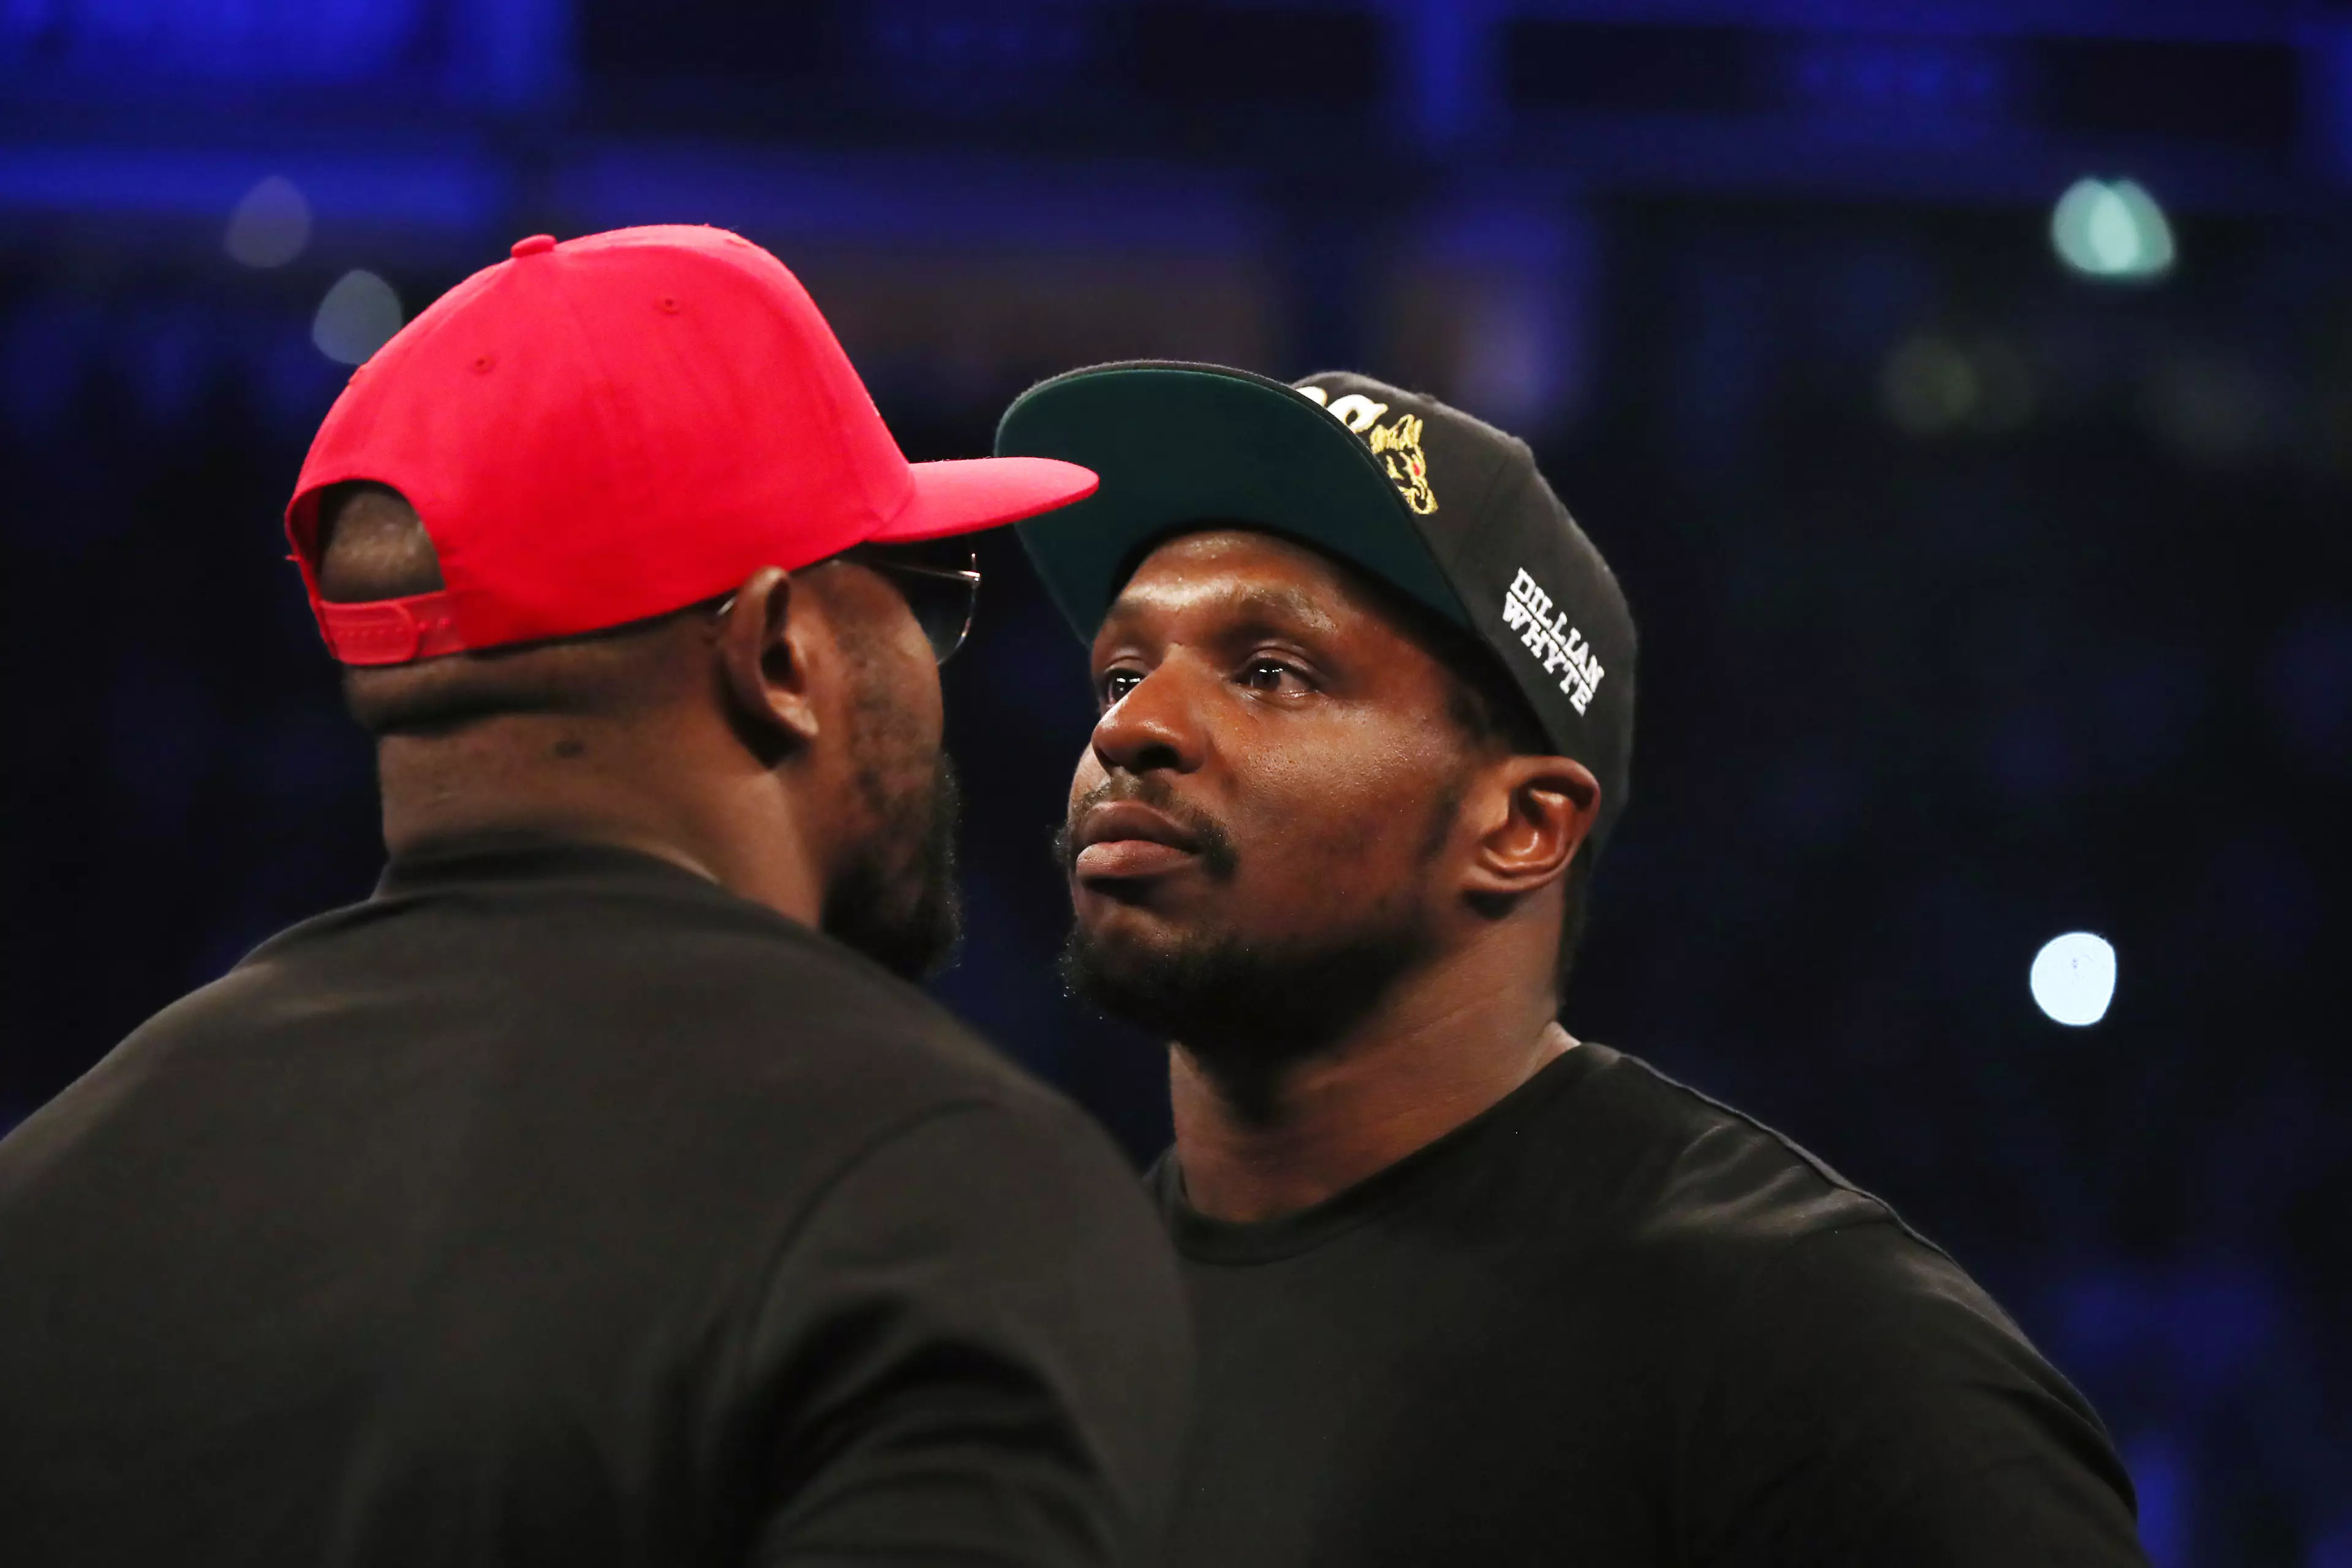 Whyte and Dereck Chisora square up. Image: PA Images